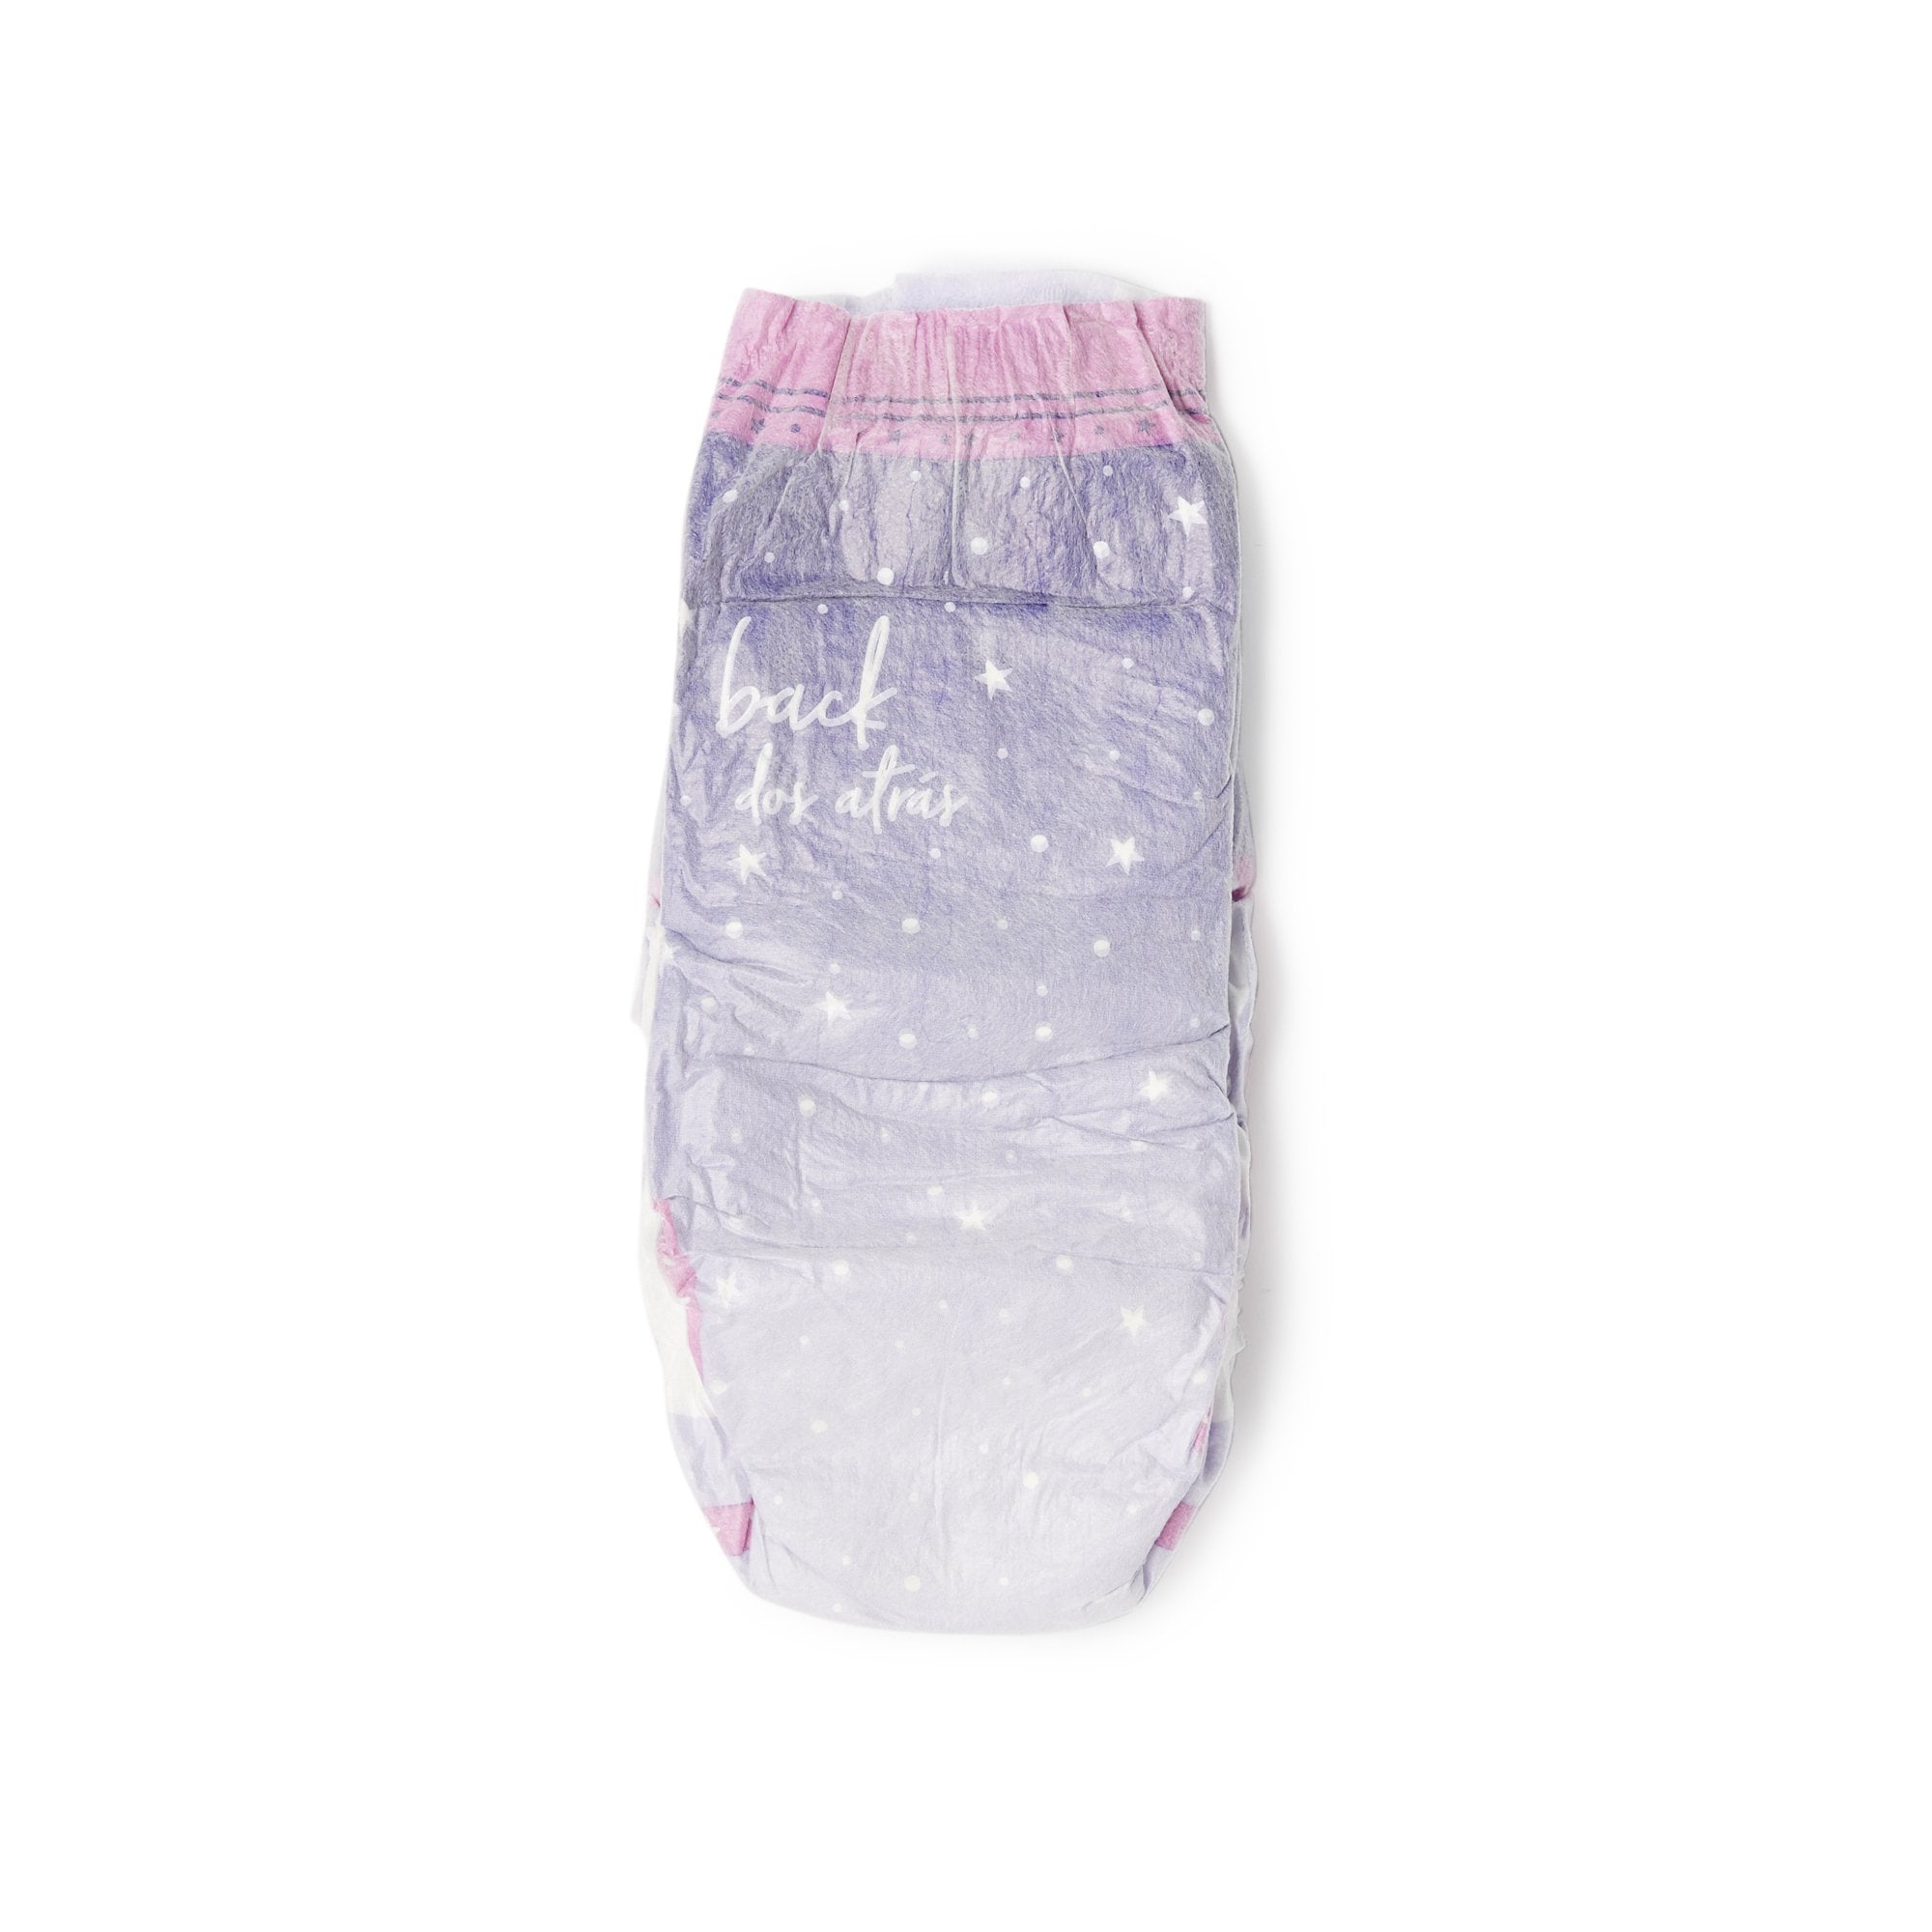 Female Youth Absorbent Underwear GoodNites Pull On with Tear Away Seams Size 5 / Large Disposable Heavy Absorbency